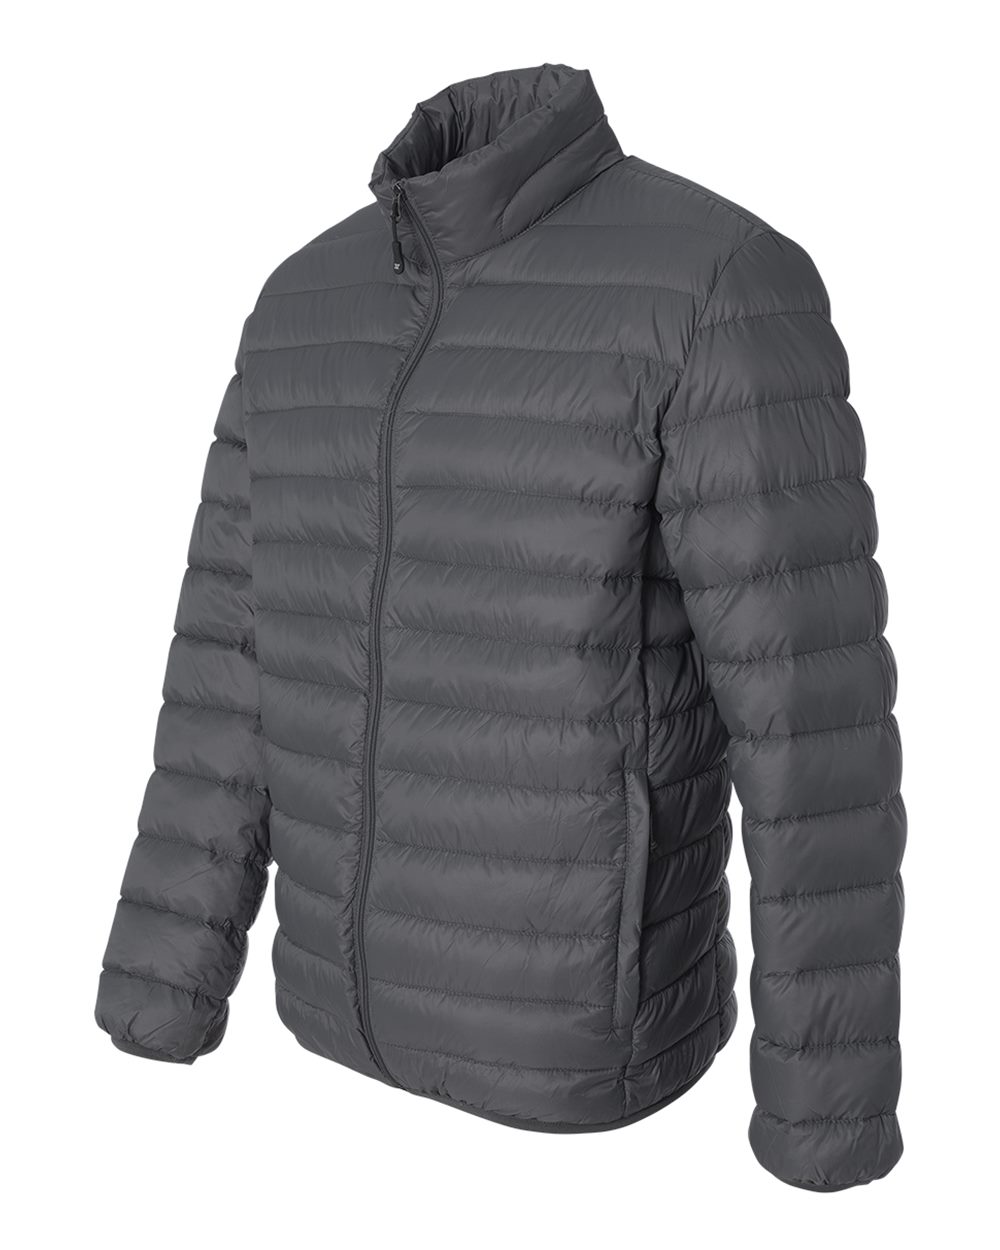 32 Degrees Packable Down Jacket - 15600-